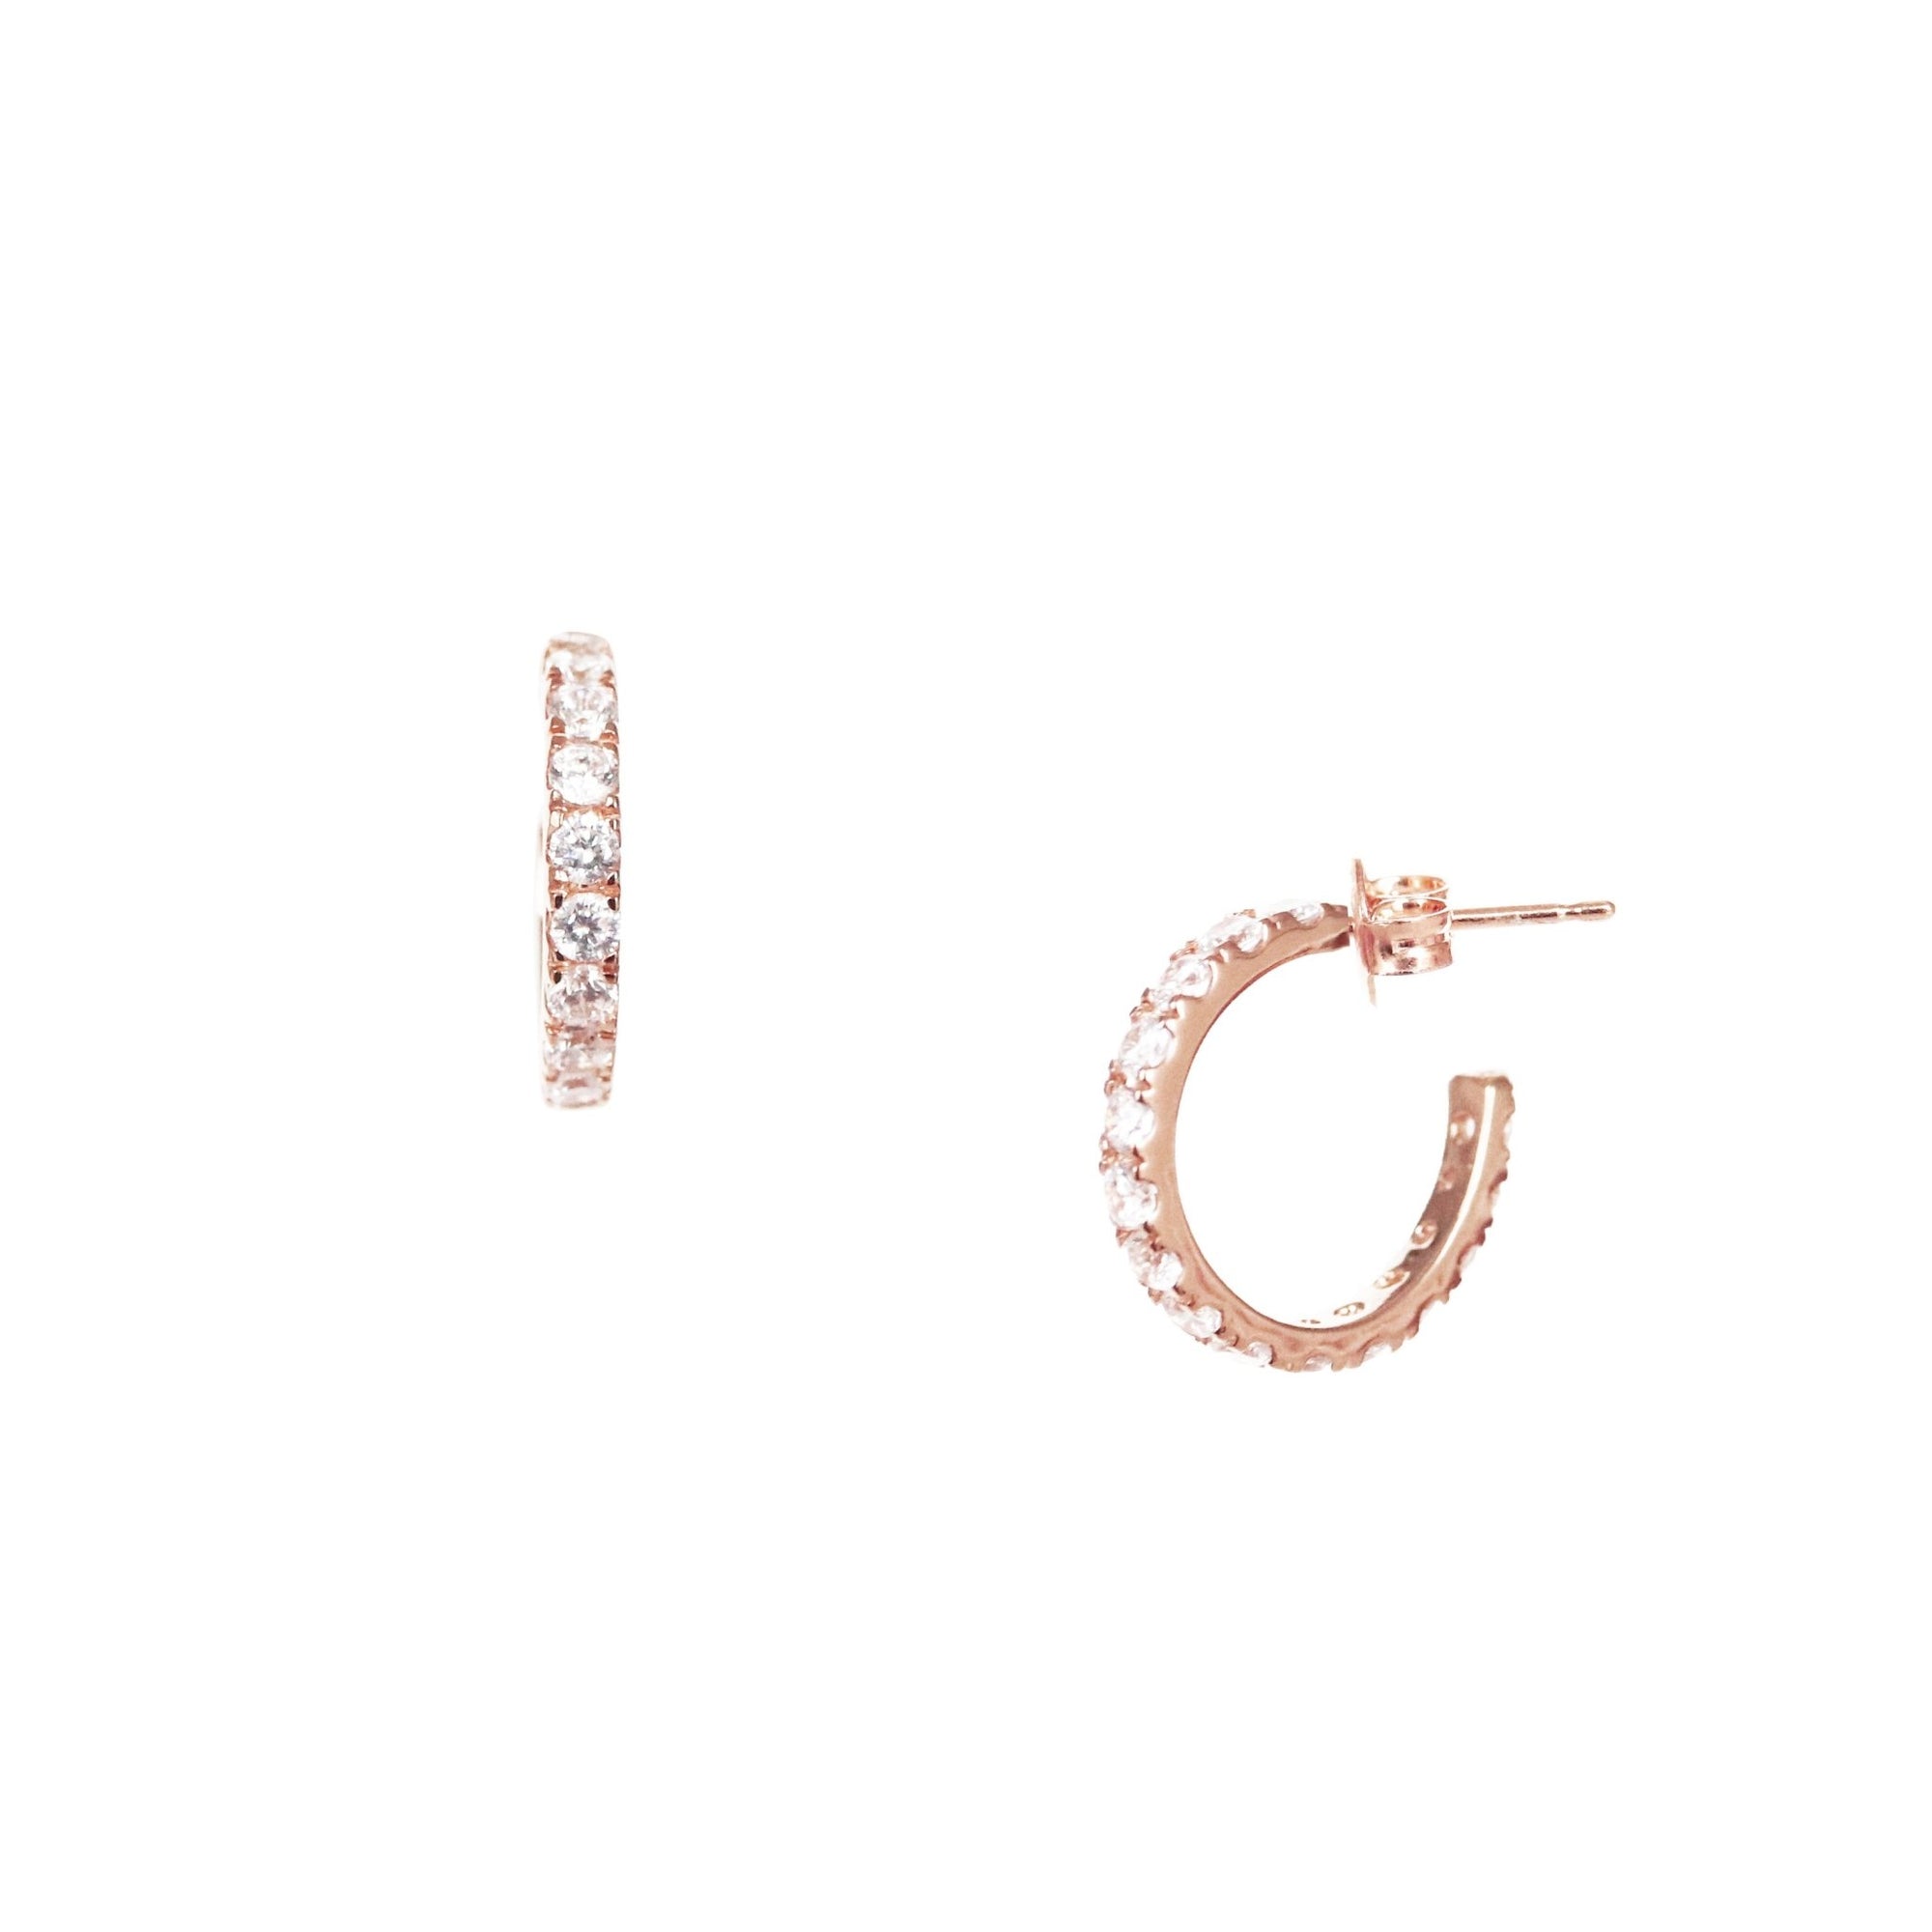 LOVE HUGGIE HOOPS - CUBIC ZIRCONIA & ROSE GOLD - SO PRETTY CARA COTTER